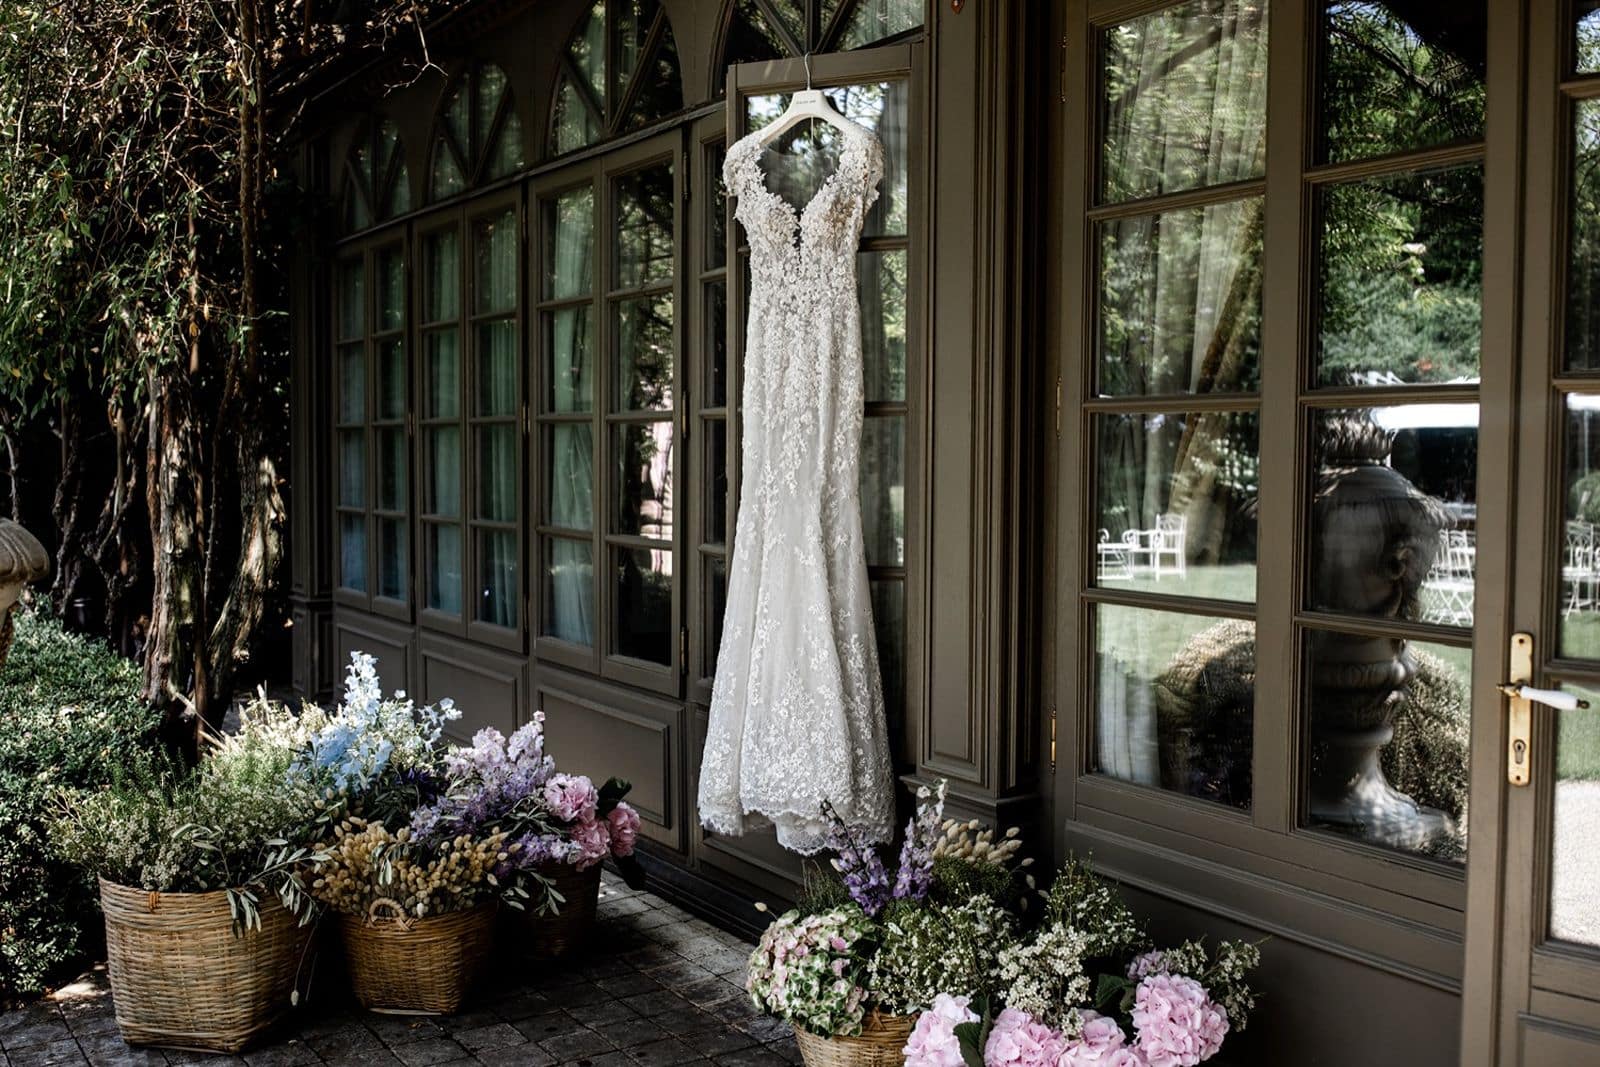 Lace wedding gown hangs in front of windows at an Italian garden wedding venue